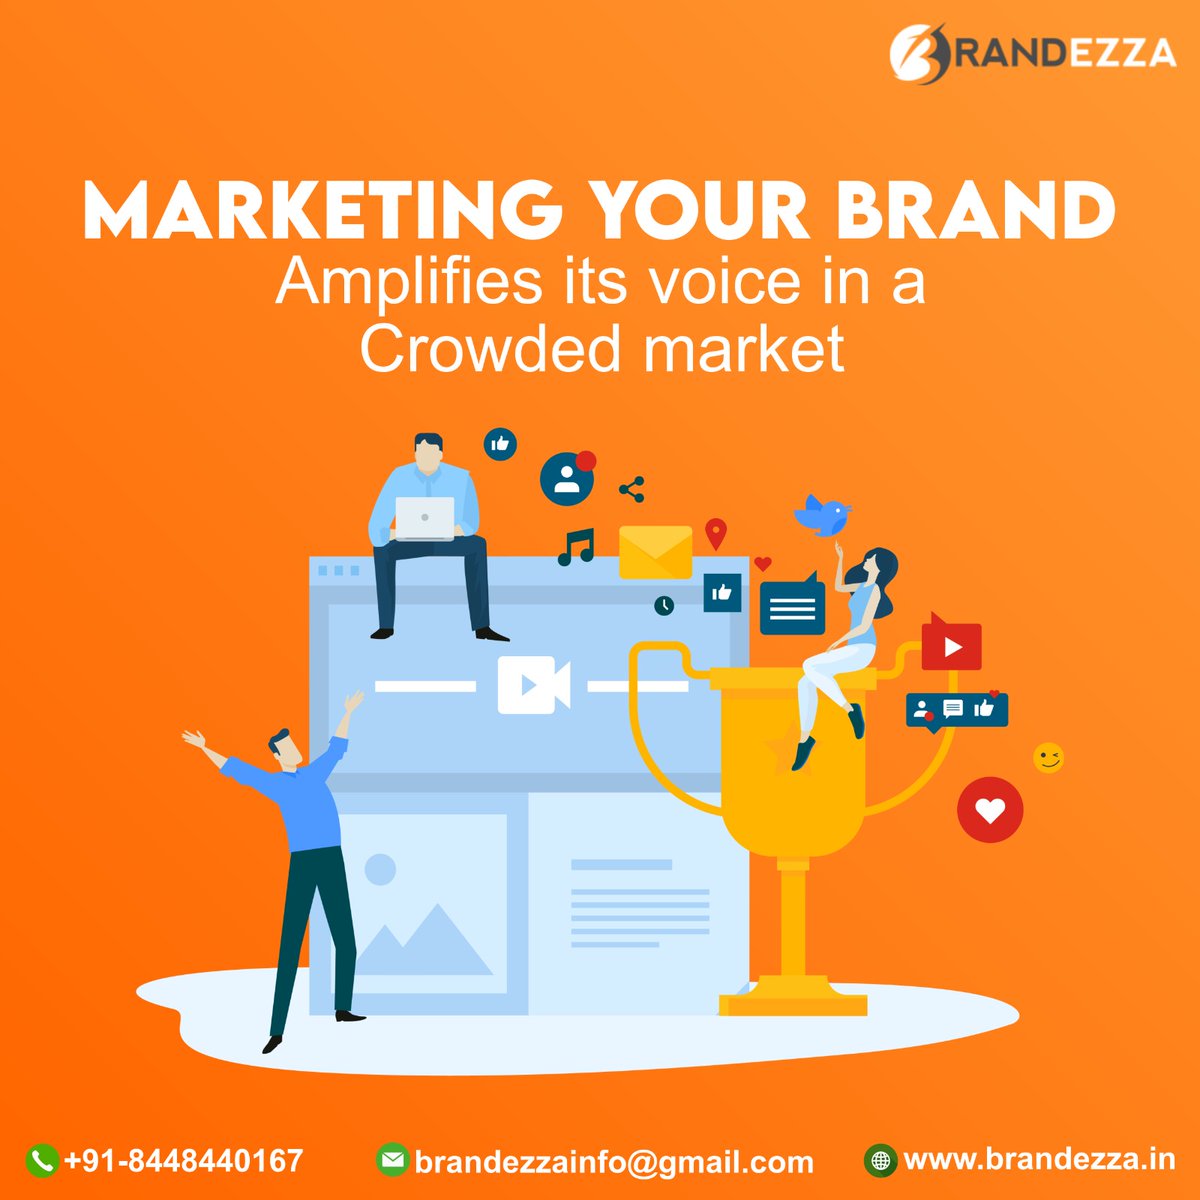 Elevate your brand's voice and reach with strategic marketing
#brandpromotion #branding #marketing #digitalmarketing #promotion #advertising #socialmediamarketing #socialmedia #brandezza